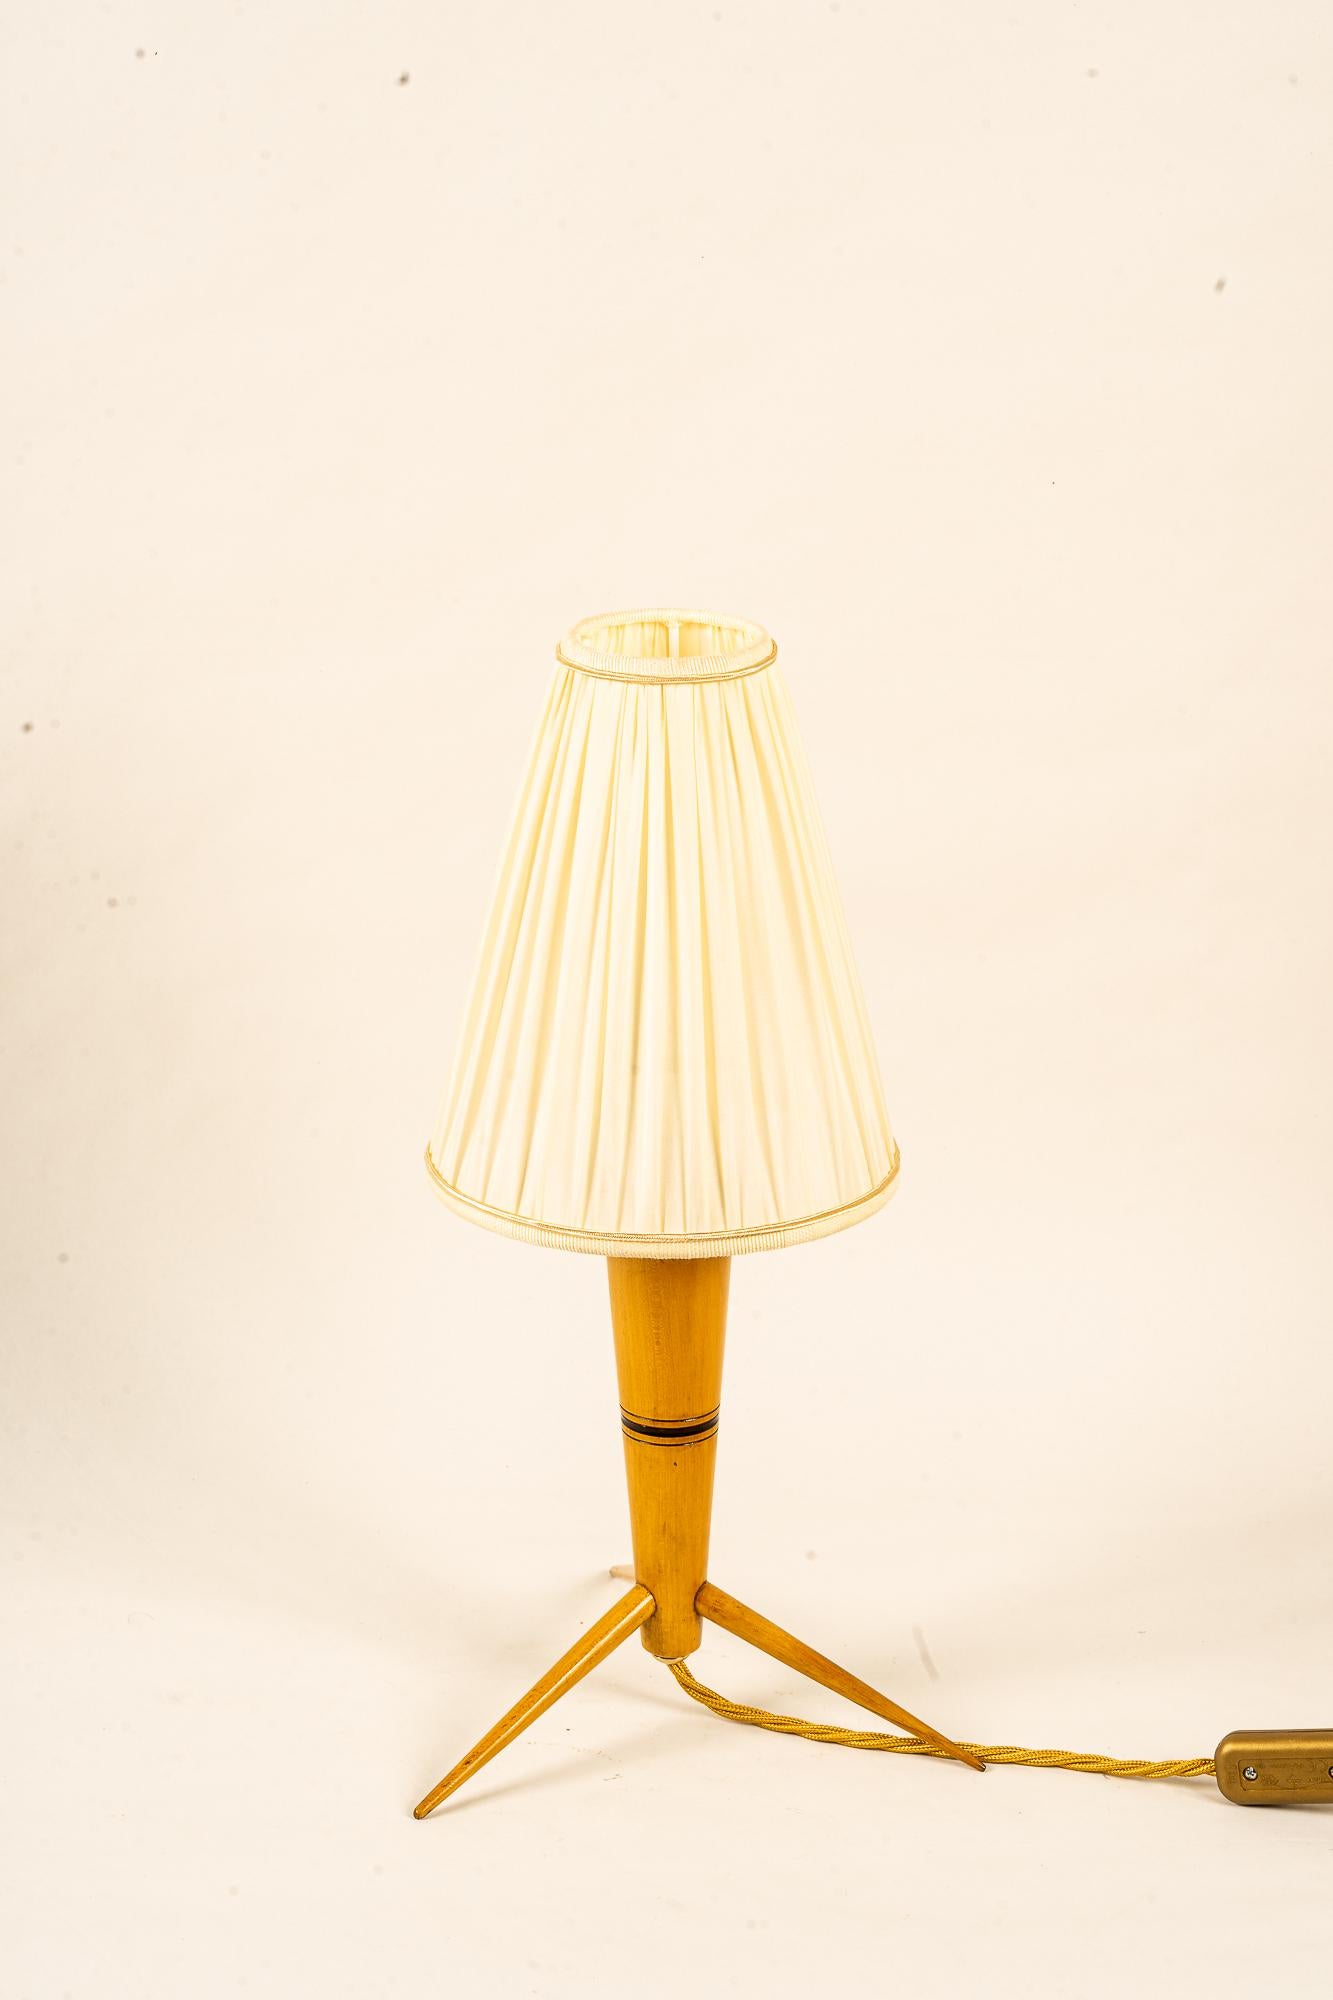 Wood table lamp with fabric shade around 1950s
Original condition
Thes shade is replaced ( new )